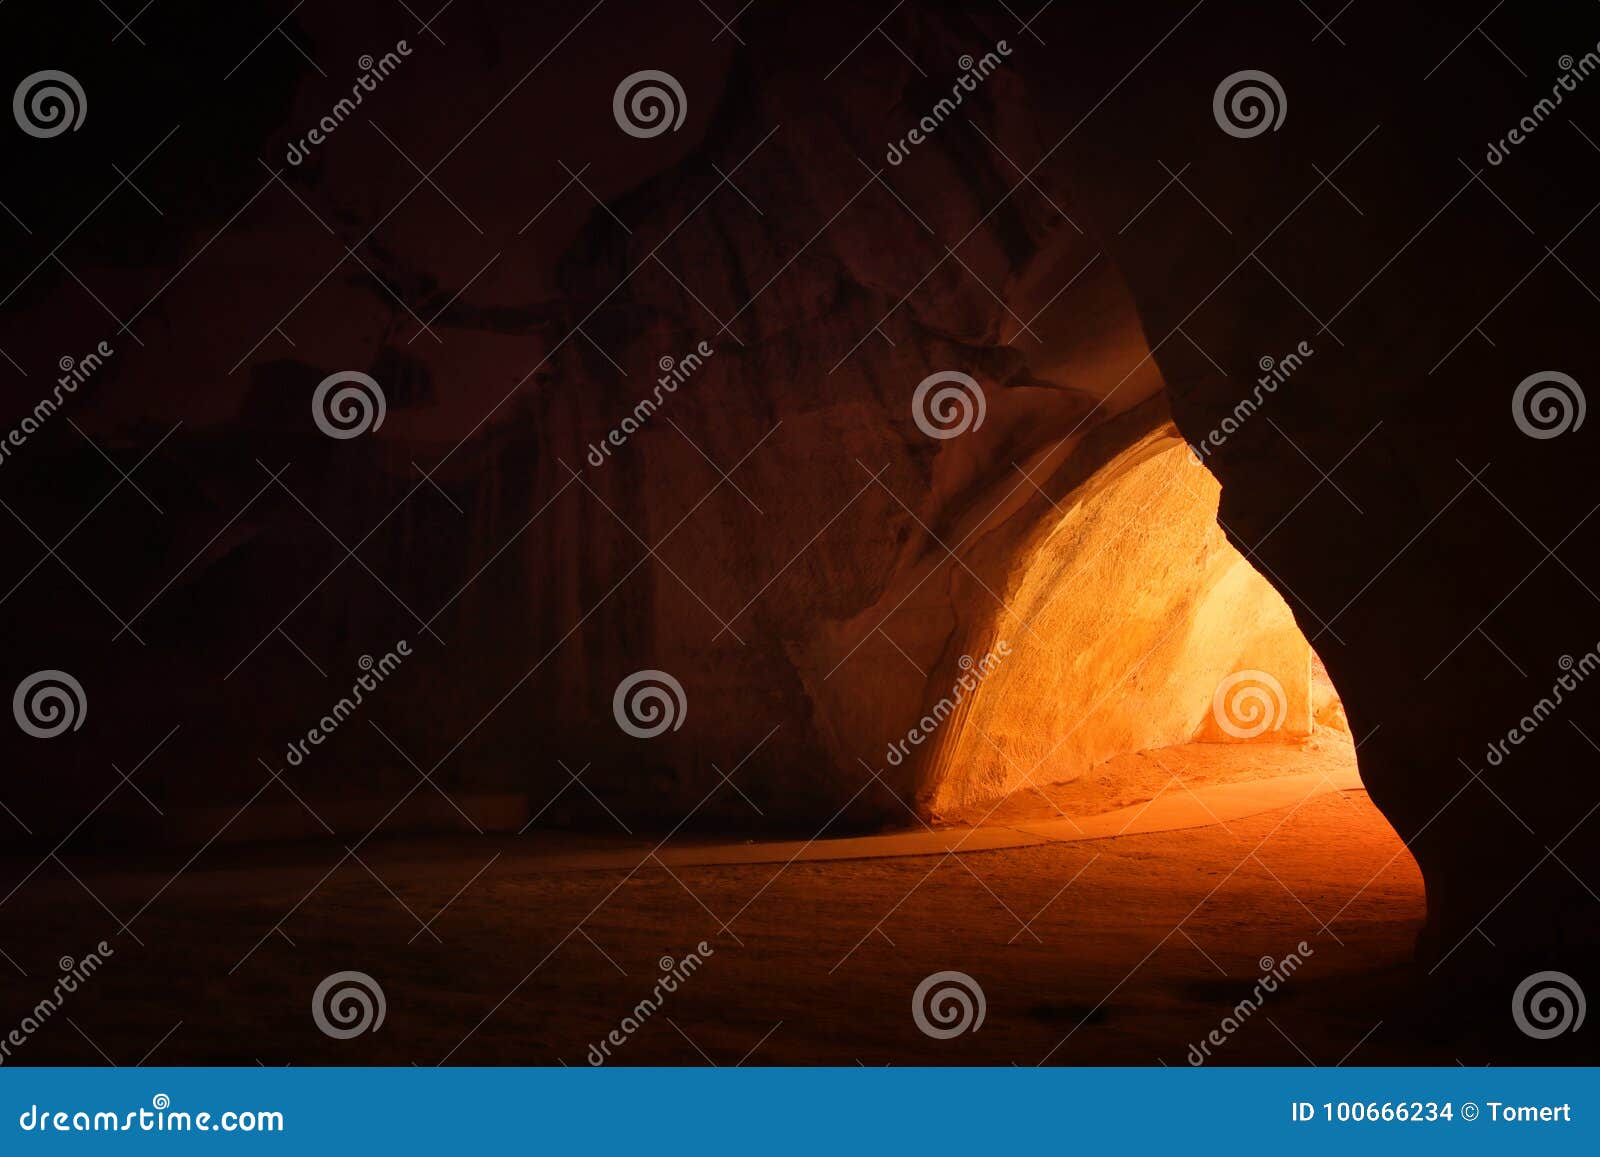 image of beautiful golden light through the cave entrance